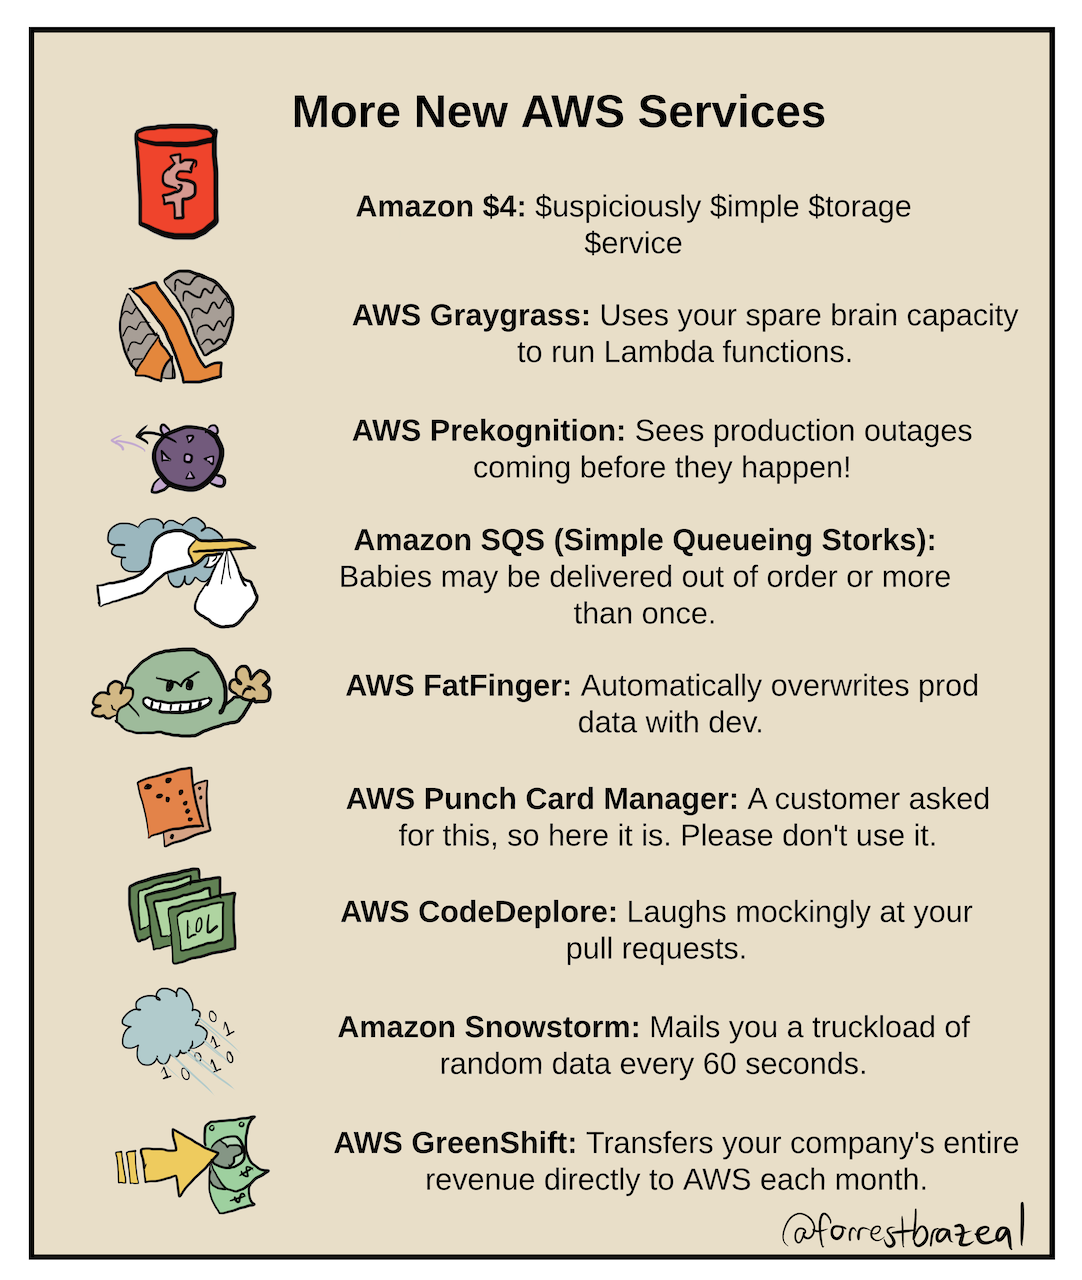 More New AWS Services